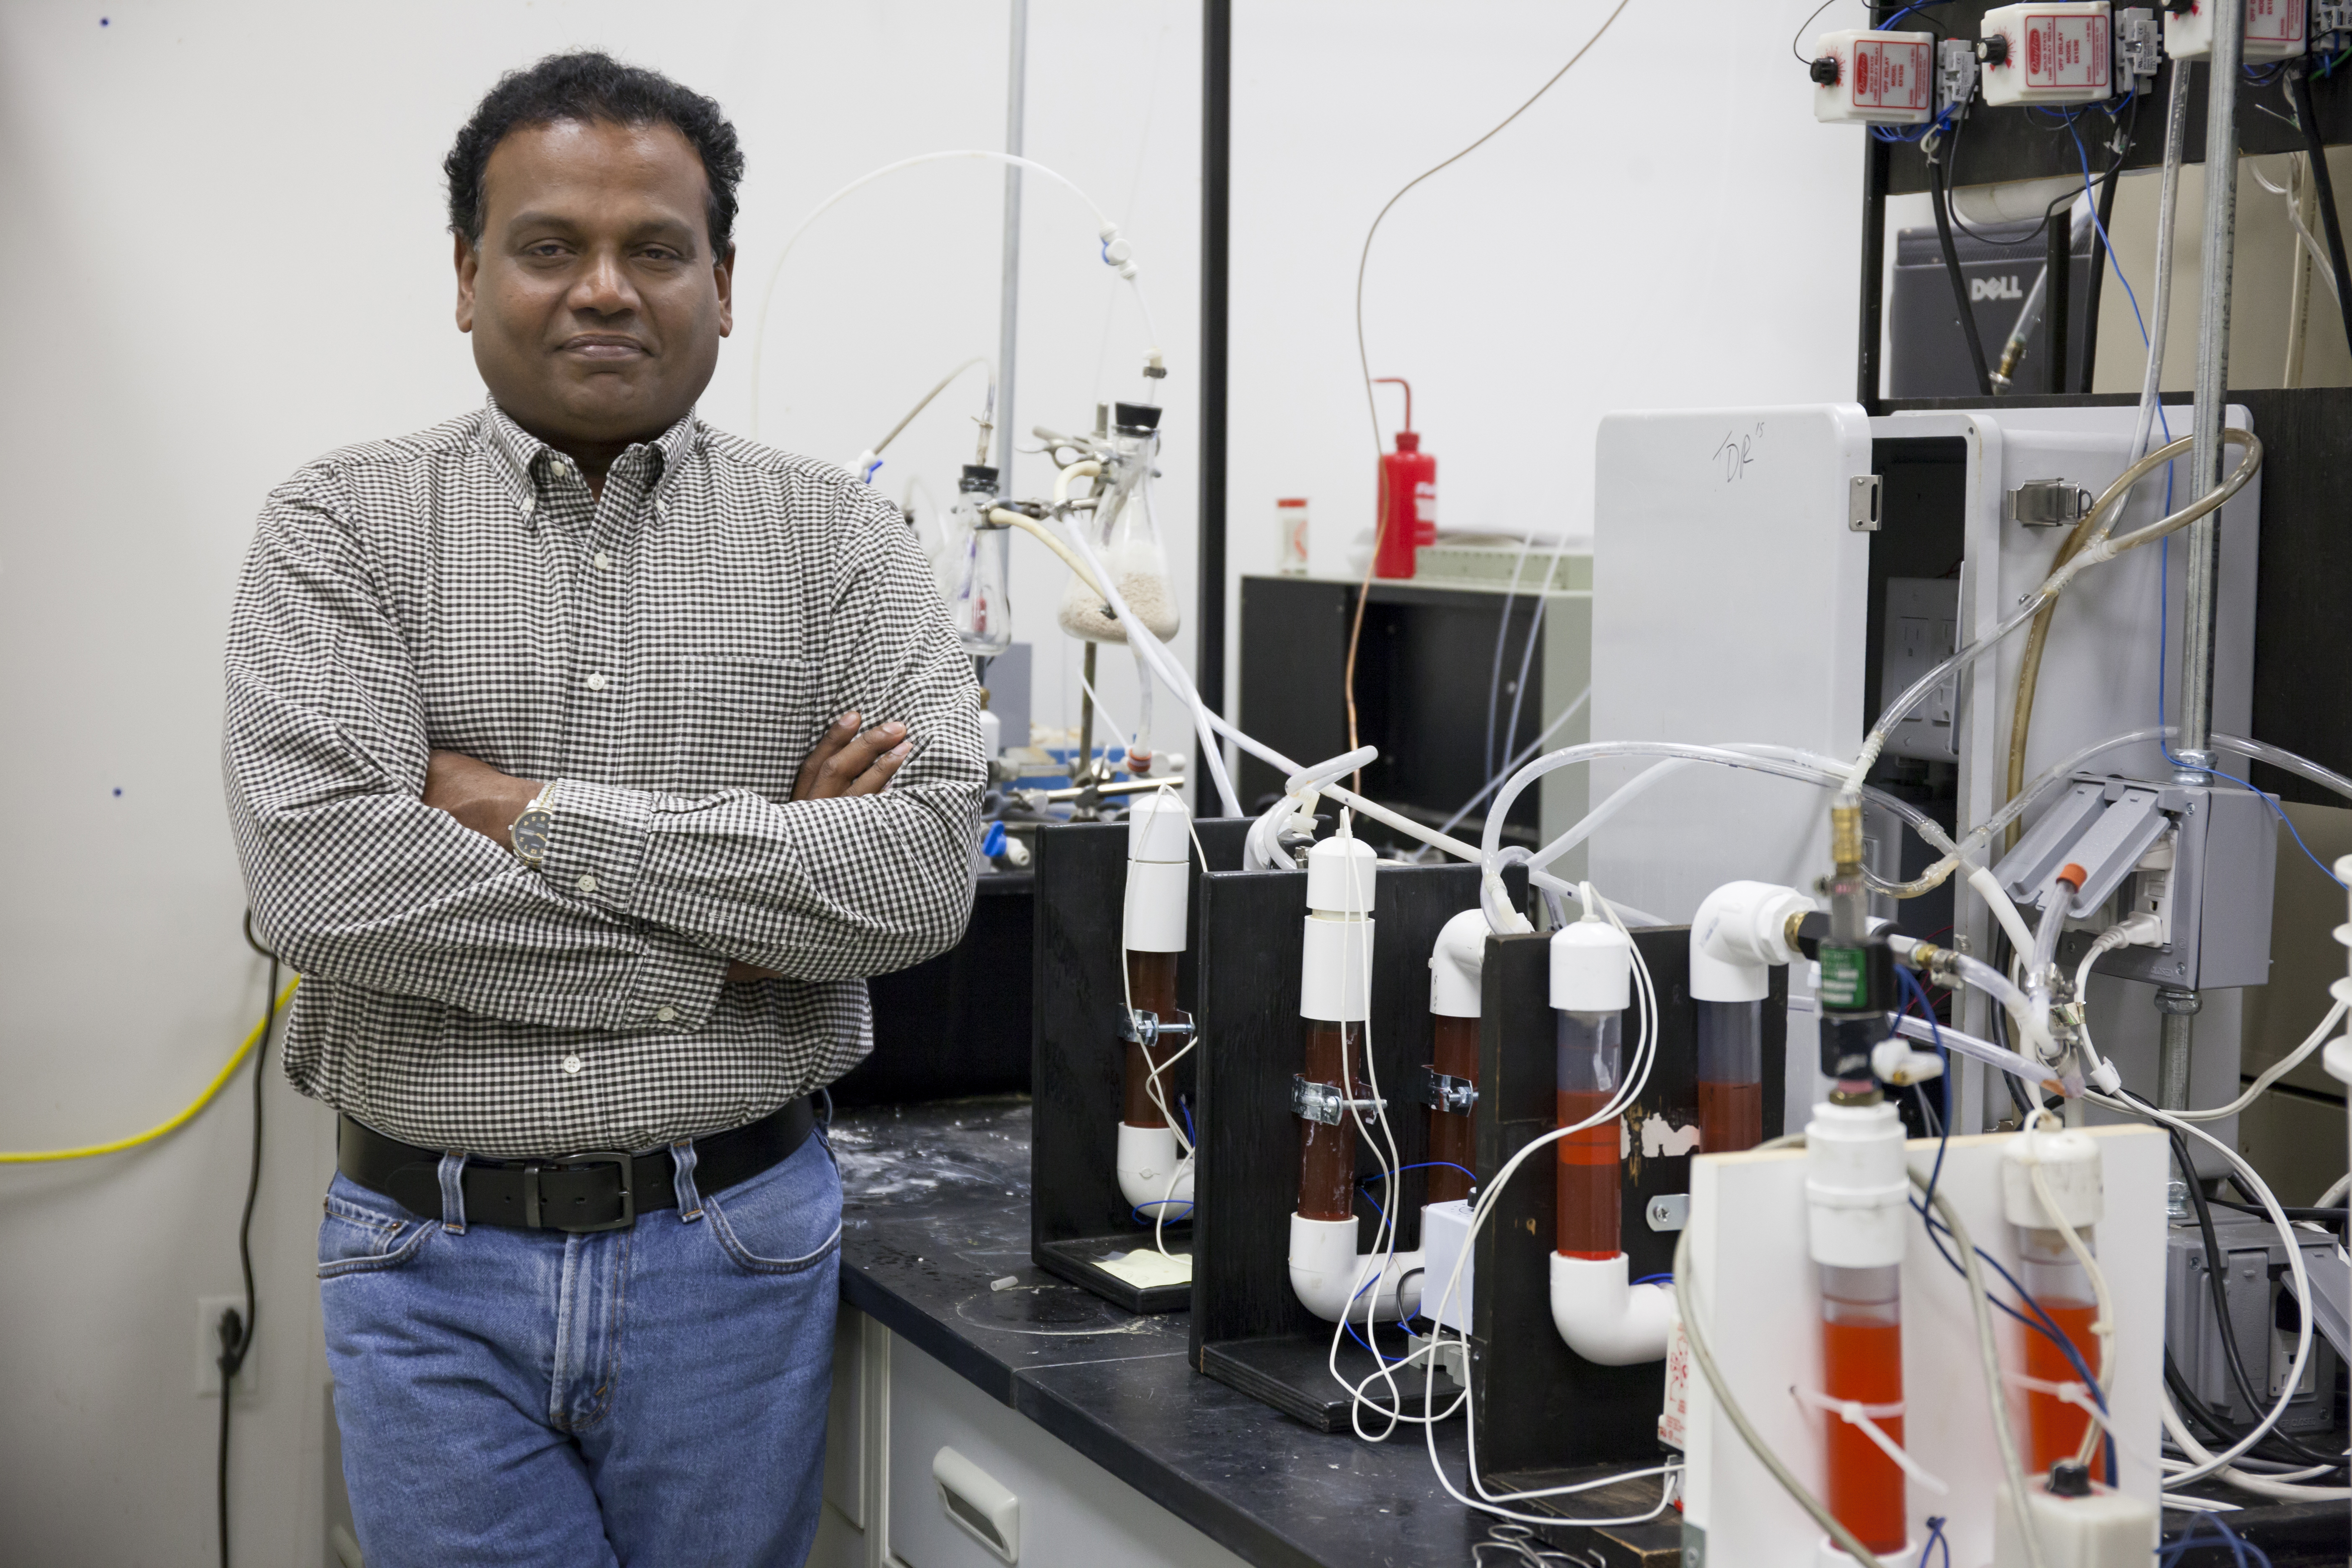 Pratap Pullammanappallil, a UF associate professor of agricultural and biological engineering, poses with an anaerobic digester used in a process he developed at NASA’s request to turn human waste into rocket fuel. Photo by Amy Stuart, UF/IFAS Communications.